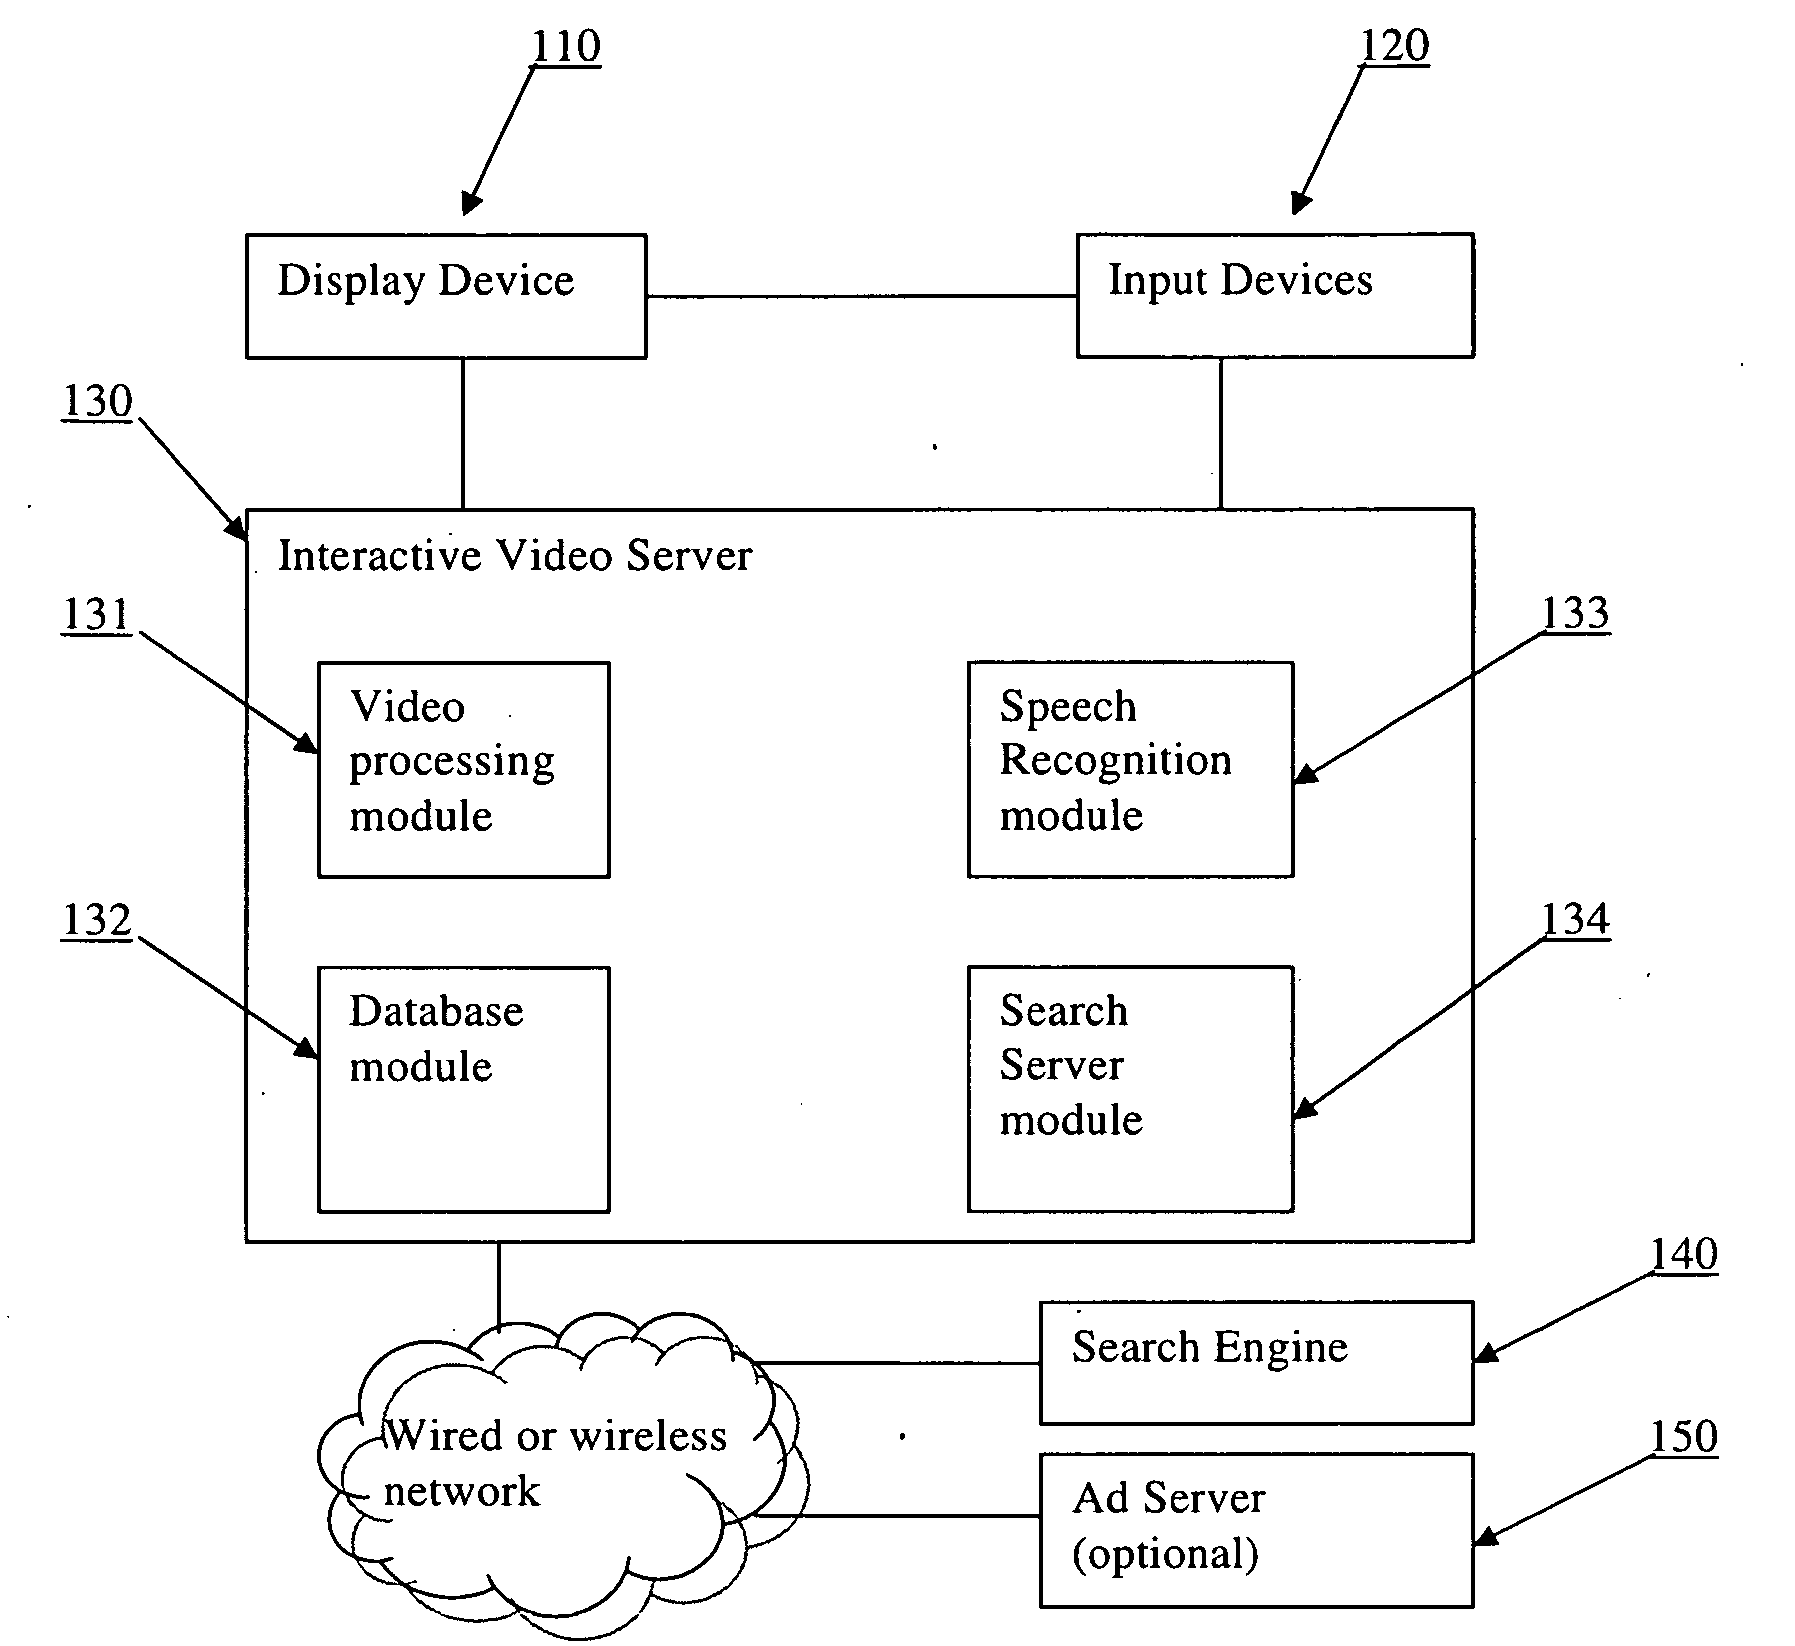 Systems and methods for integrating search capability in interactive video